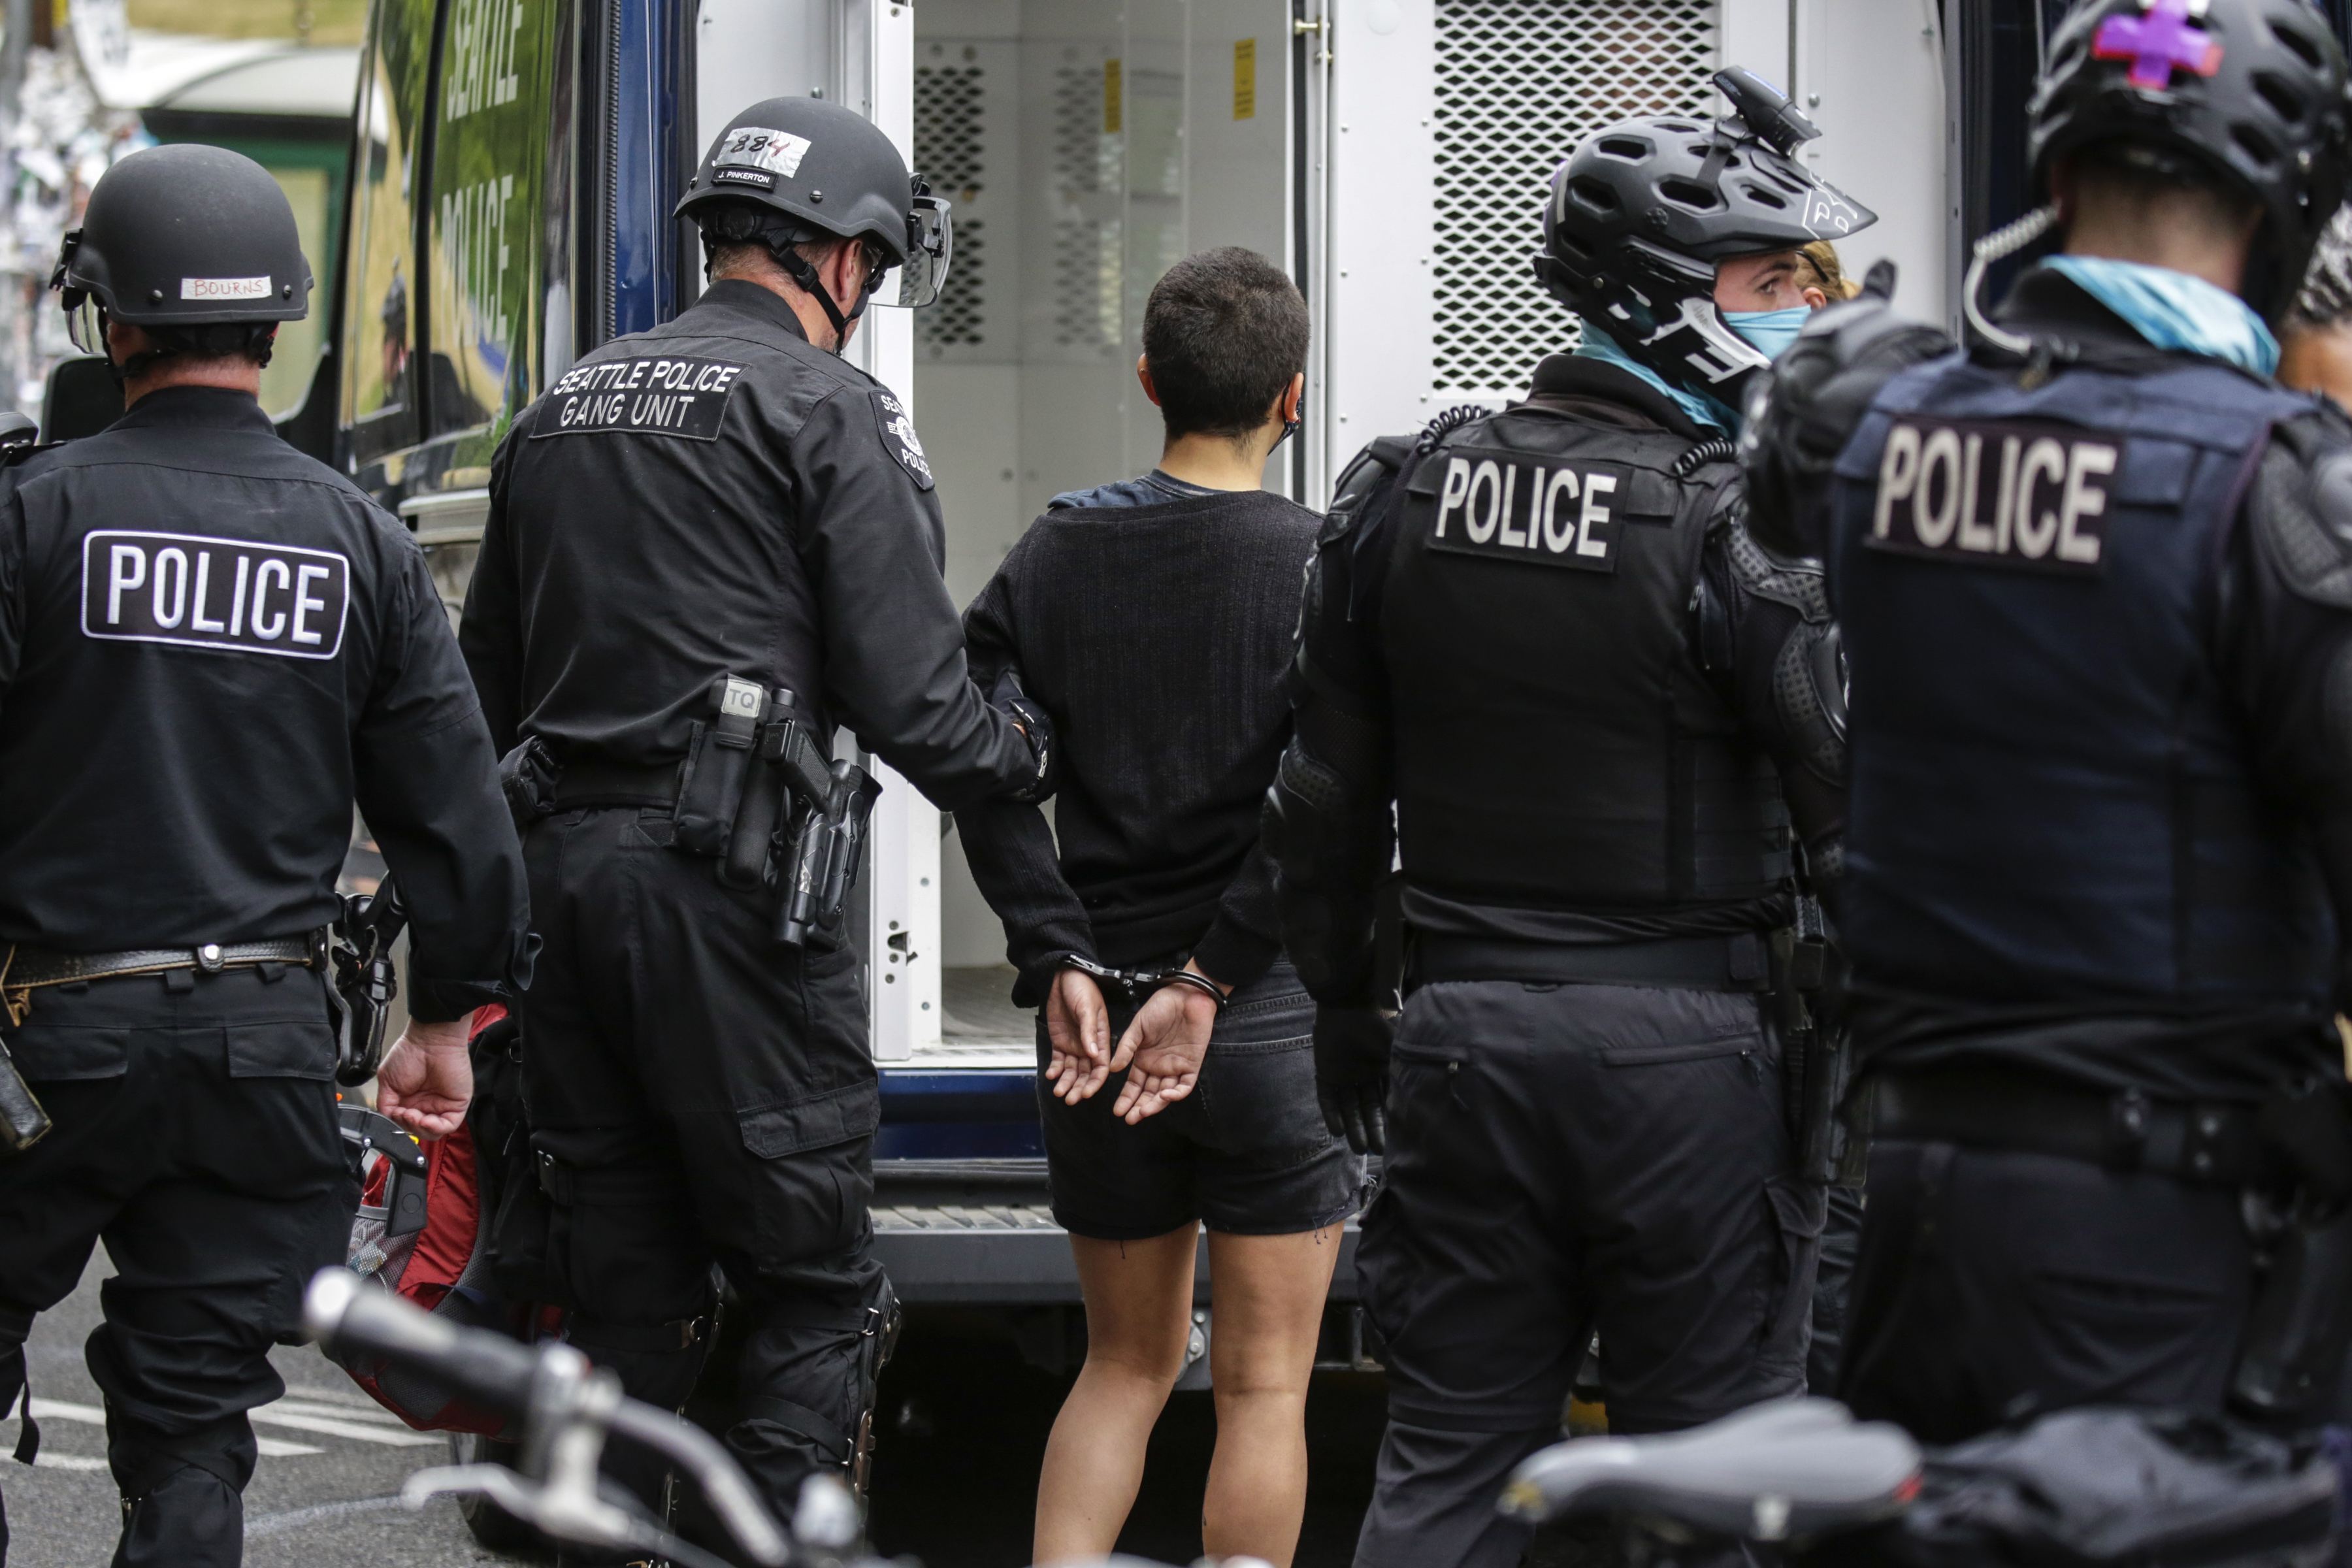 Seattle Police arrest a woman after demonstrators blocked the intersection of East Pine Street and 11th Avenue following the clearing of the Capitol Hill Occupied Protest (CHOP) by police in Seattle, Washington on July 1, 2020. (JASON REDMOND/AFP via Getty Images)